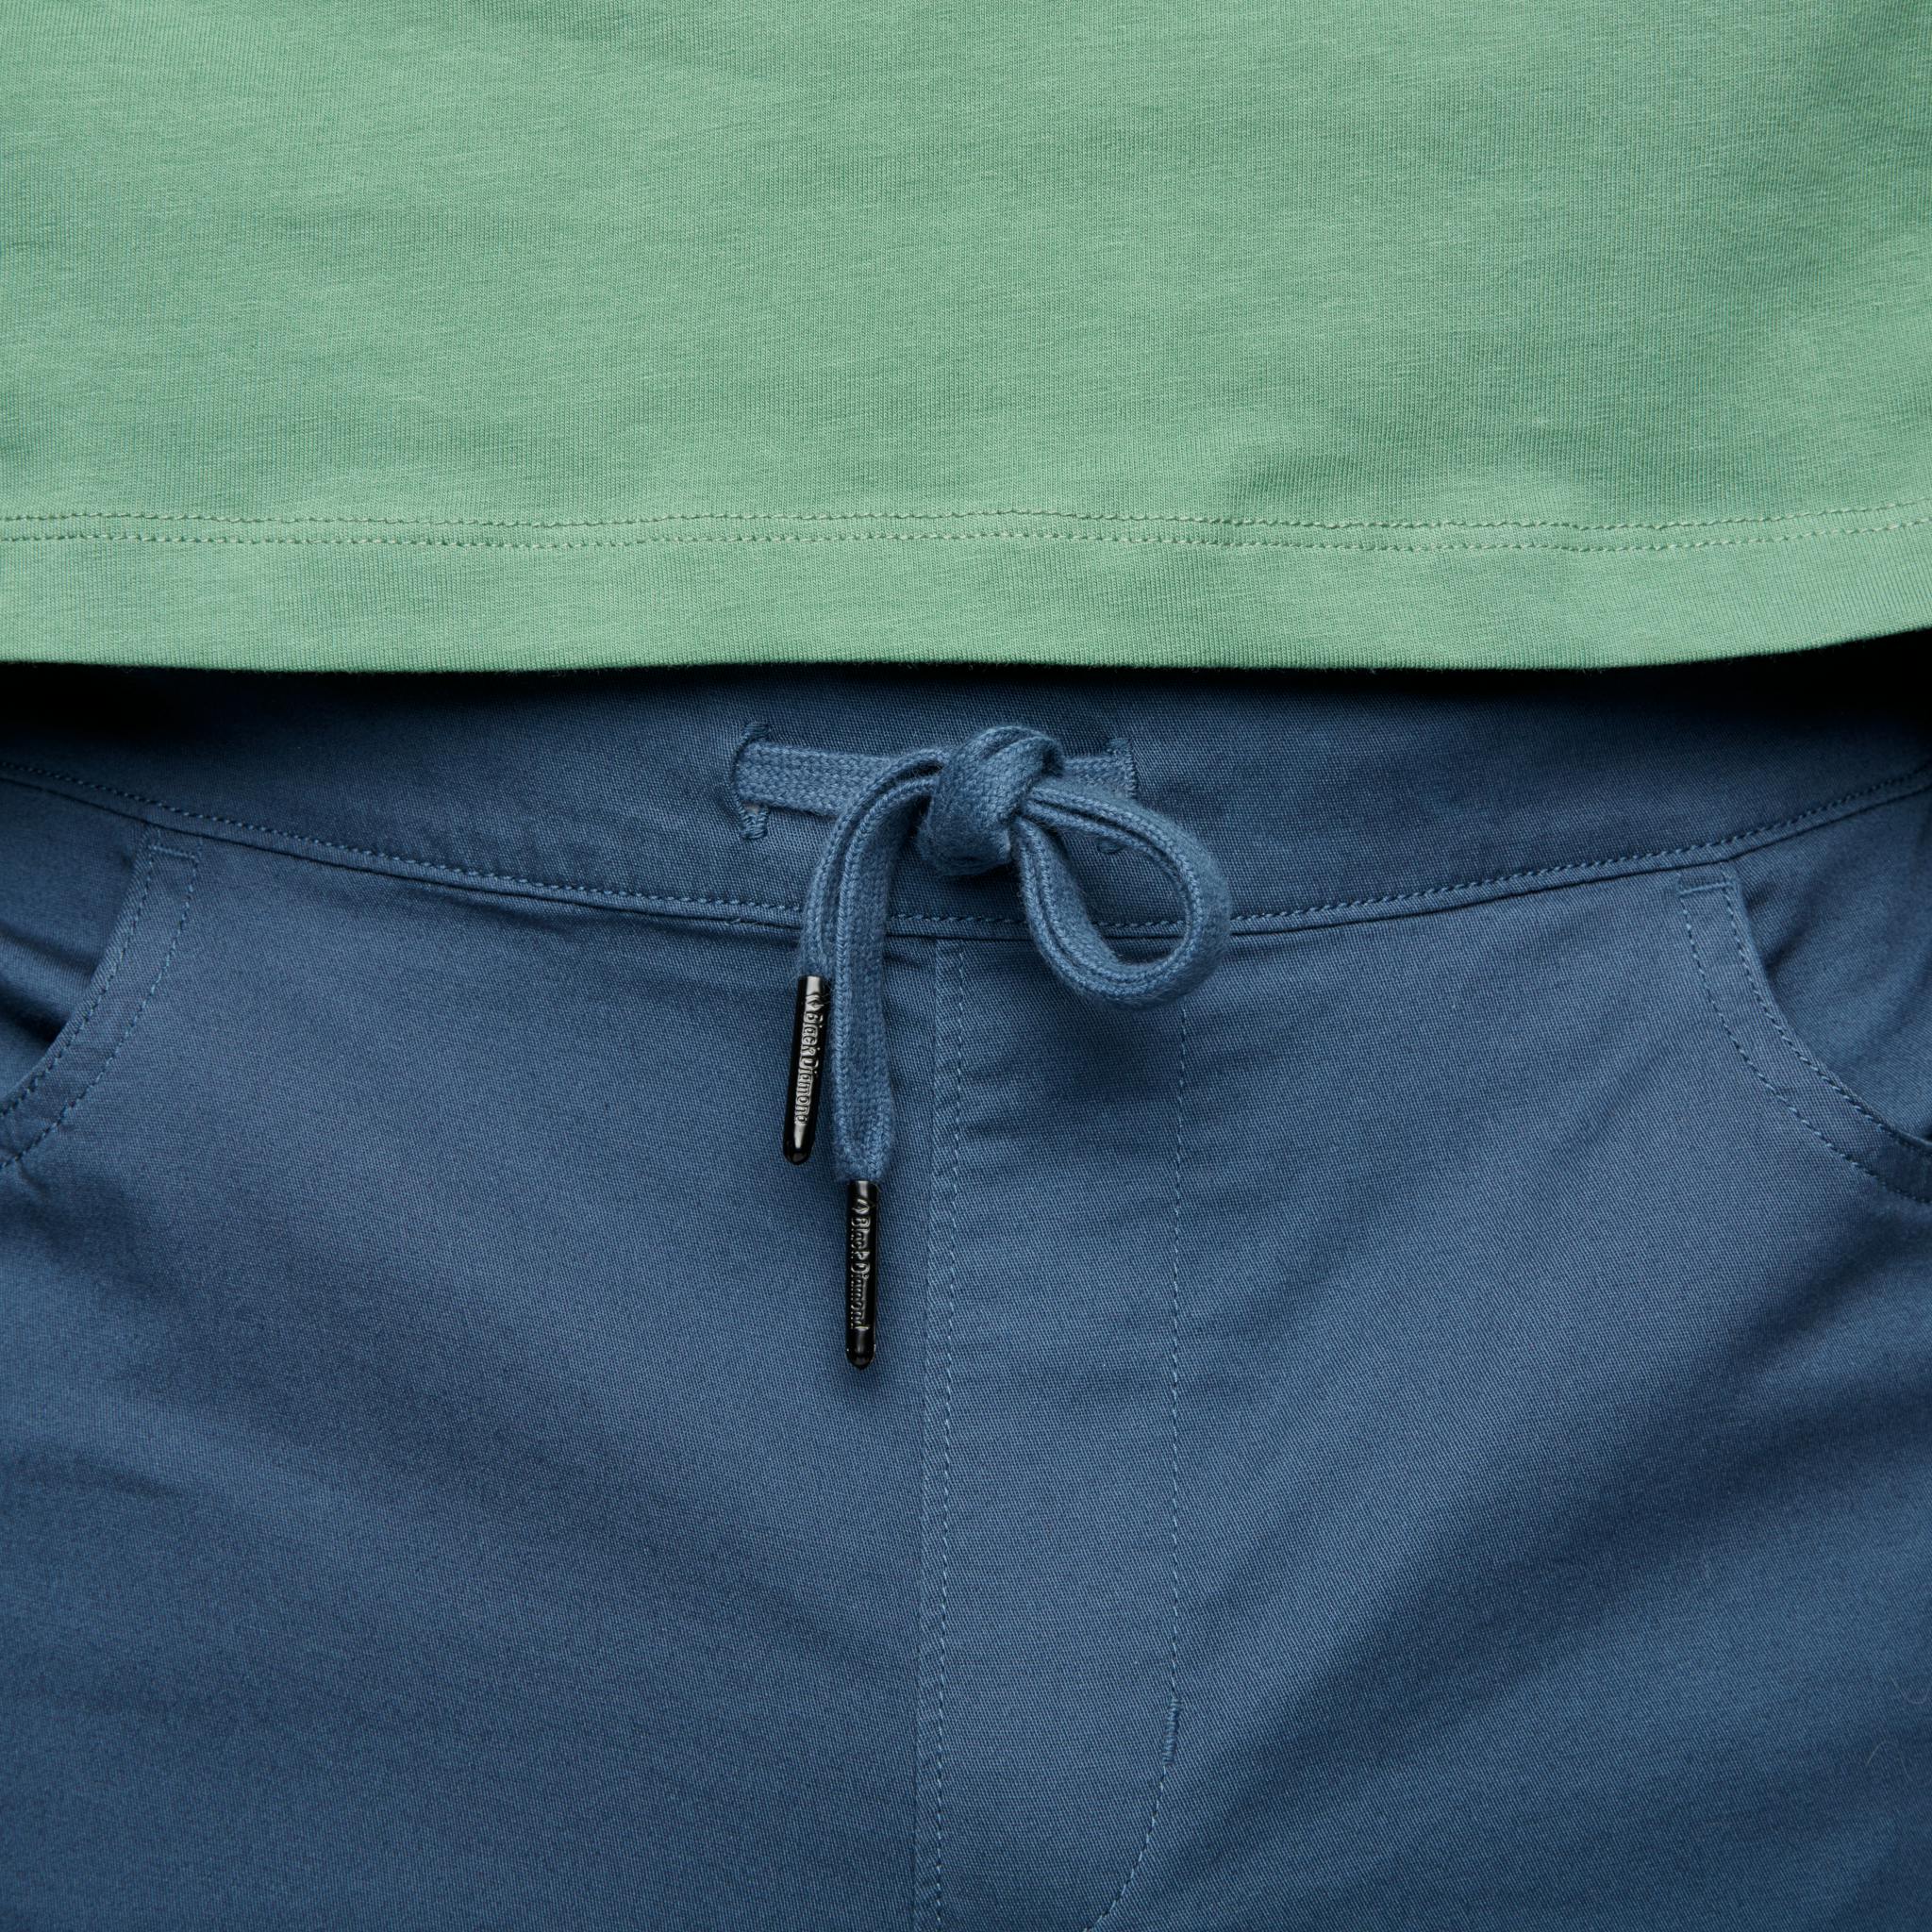 Elastic waistband with adjustable drawstring for a snug fit.